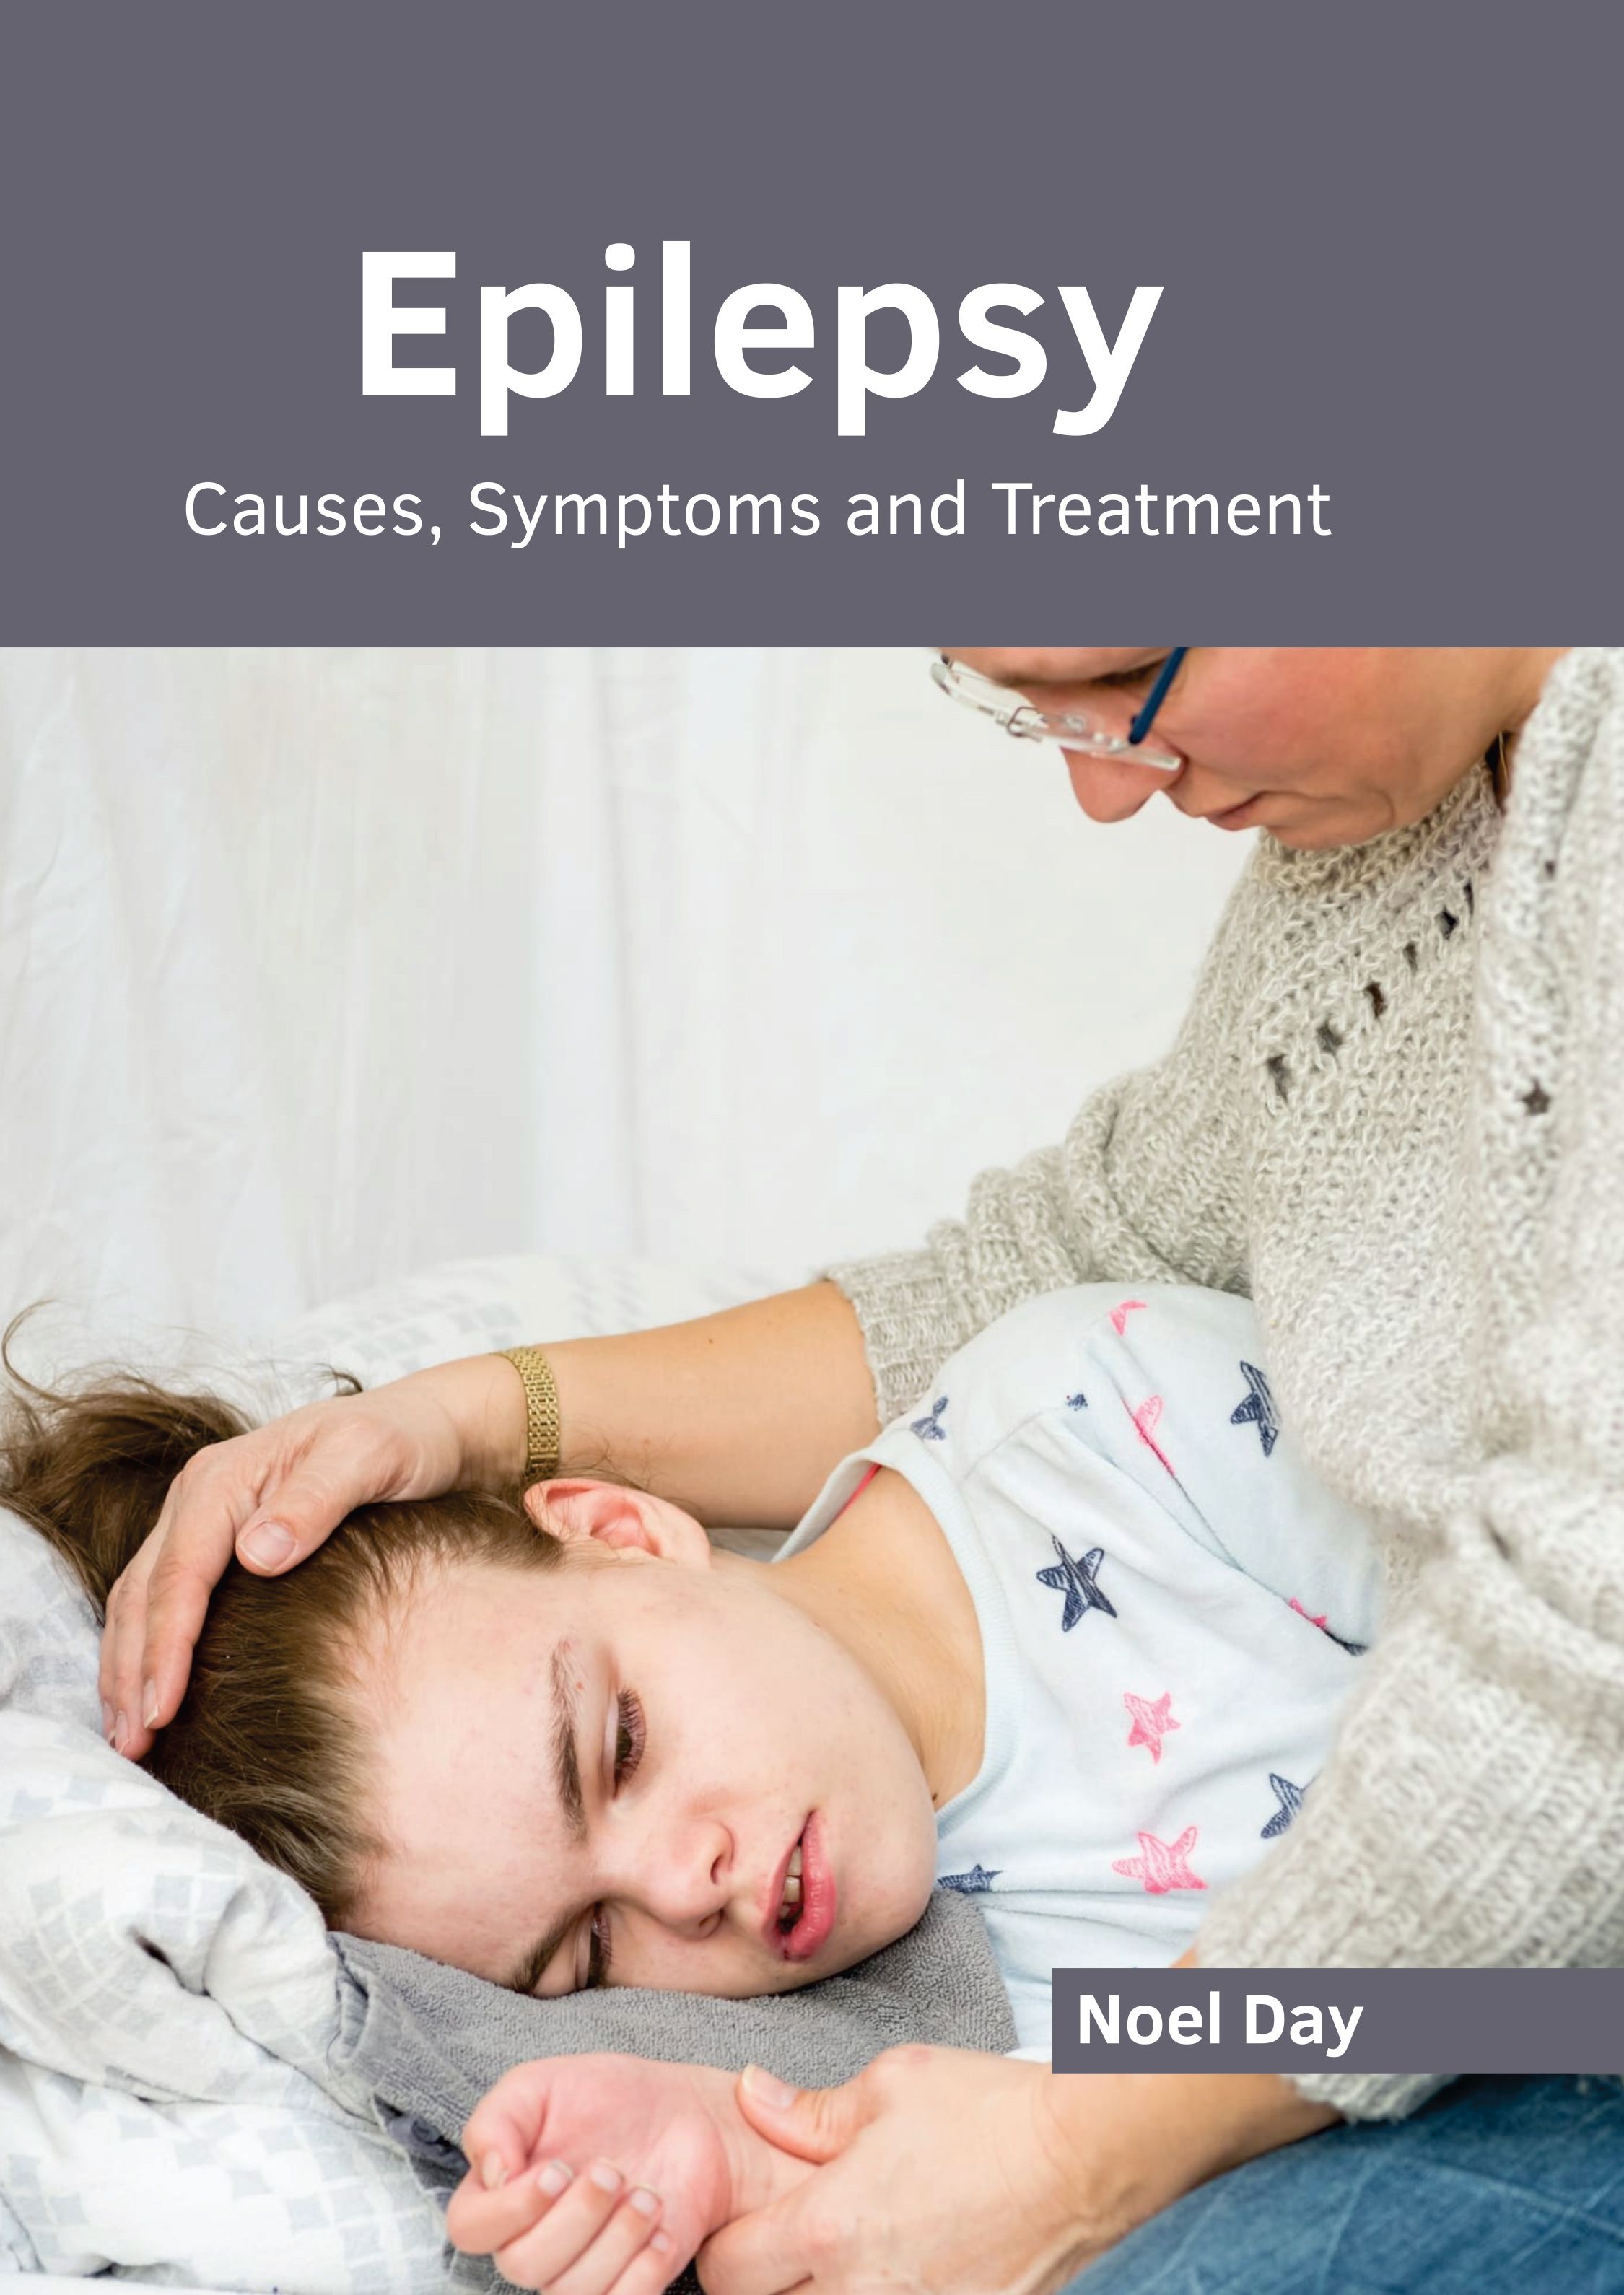 

exclusive-publishers/american-medical-publishers/epilepsy-causes-symptoms-and-treatment-9798887400983